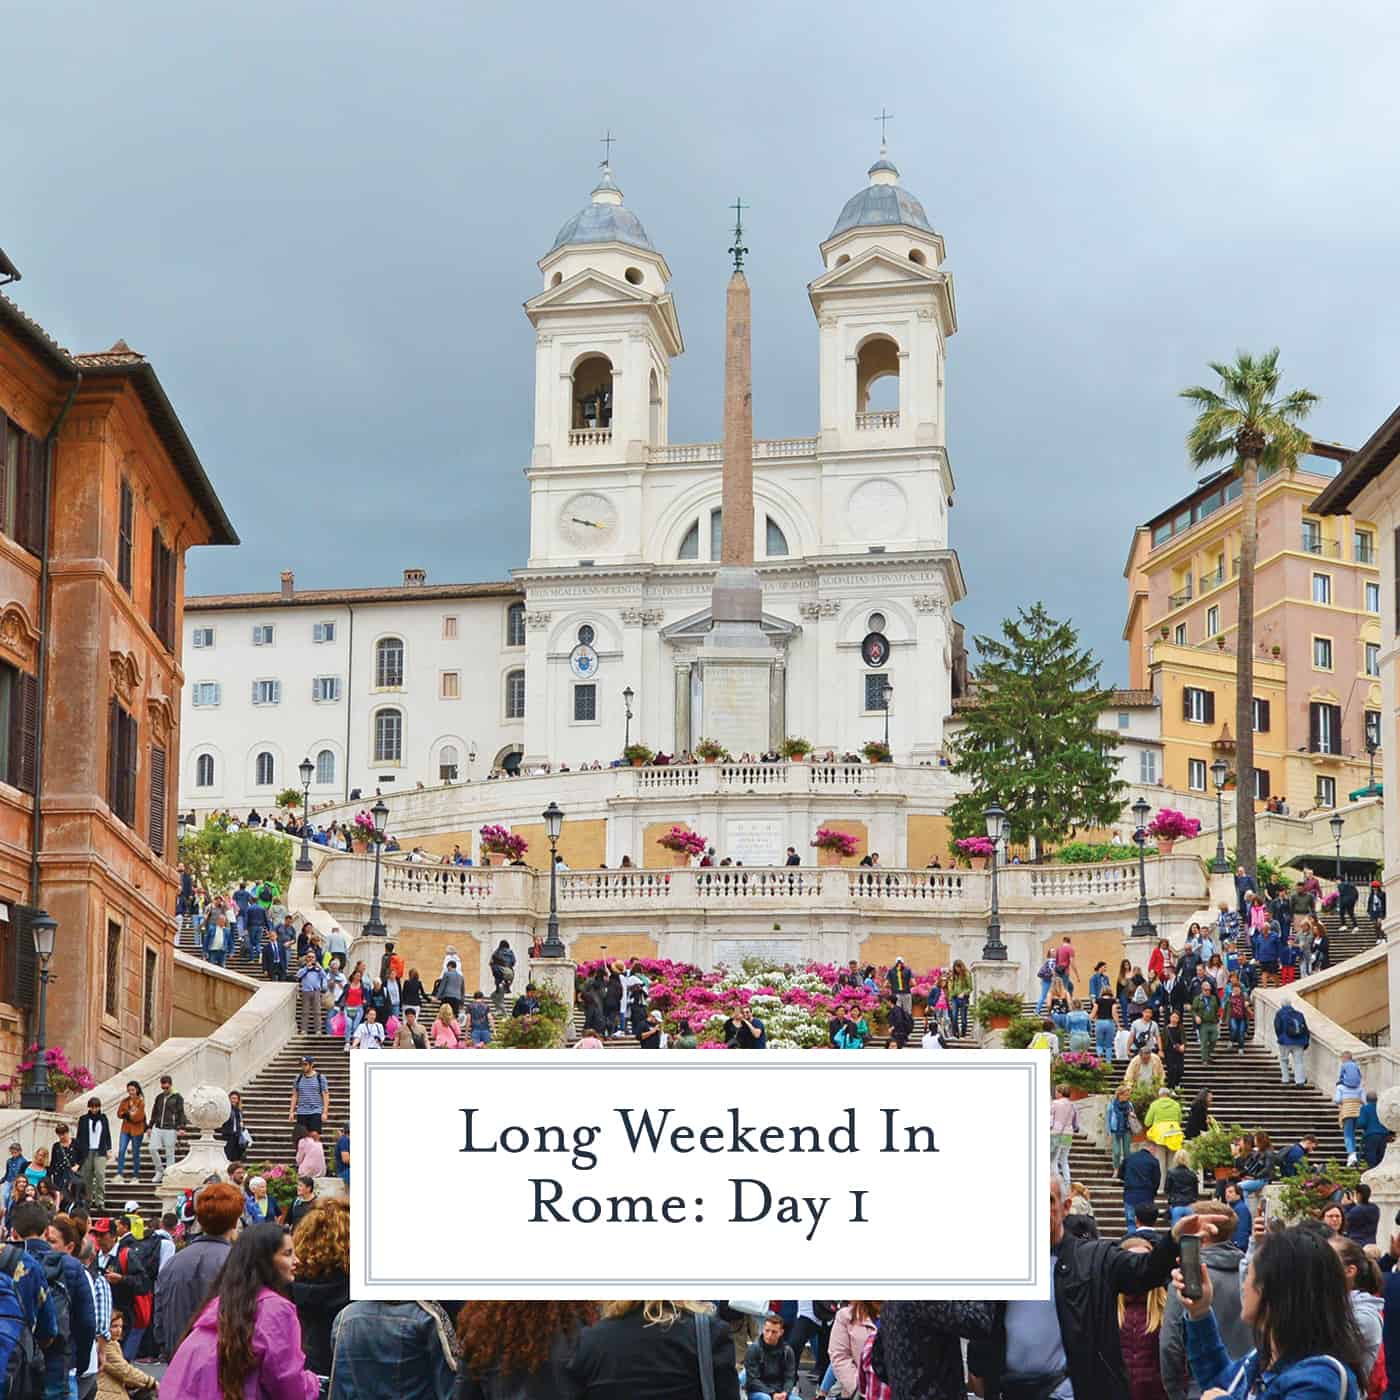 Plan your long weekend in Rome with this easy itinerary that covers all the main attractions in just 2 1/2 days and all by walking! #romeitaly #triptoitaly www.savoryexperiments.com